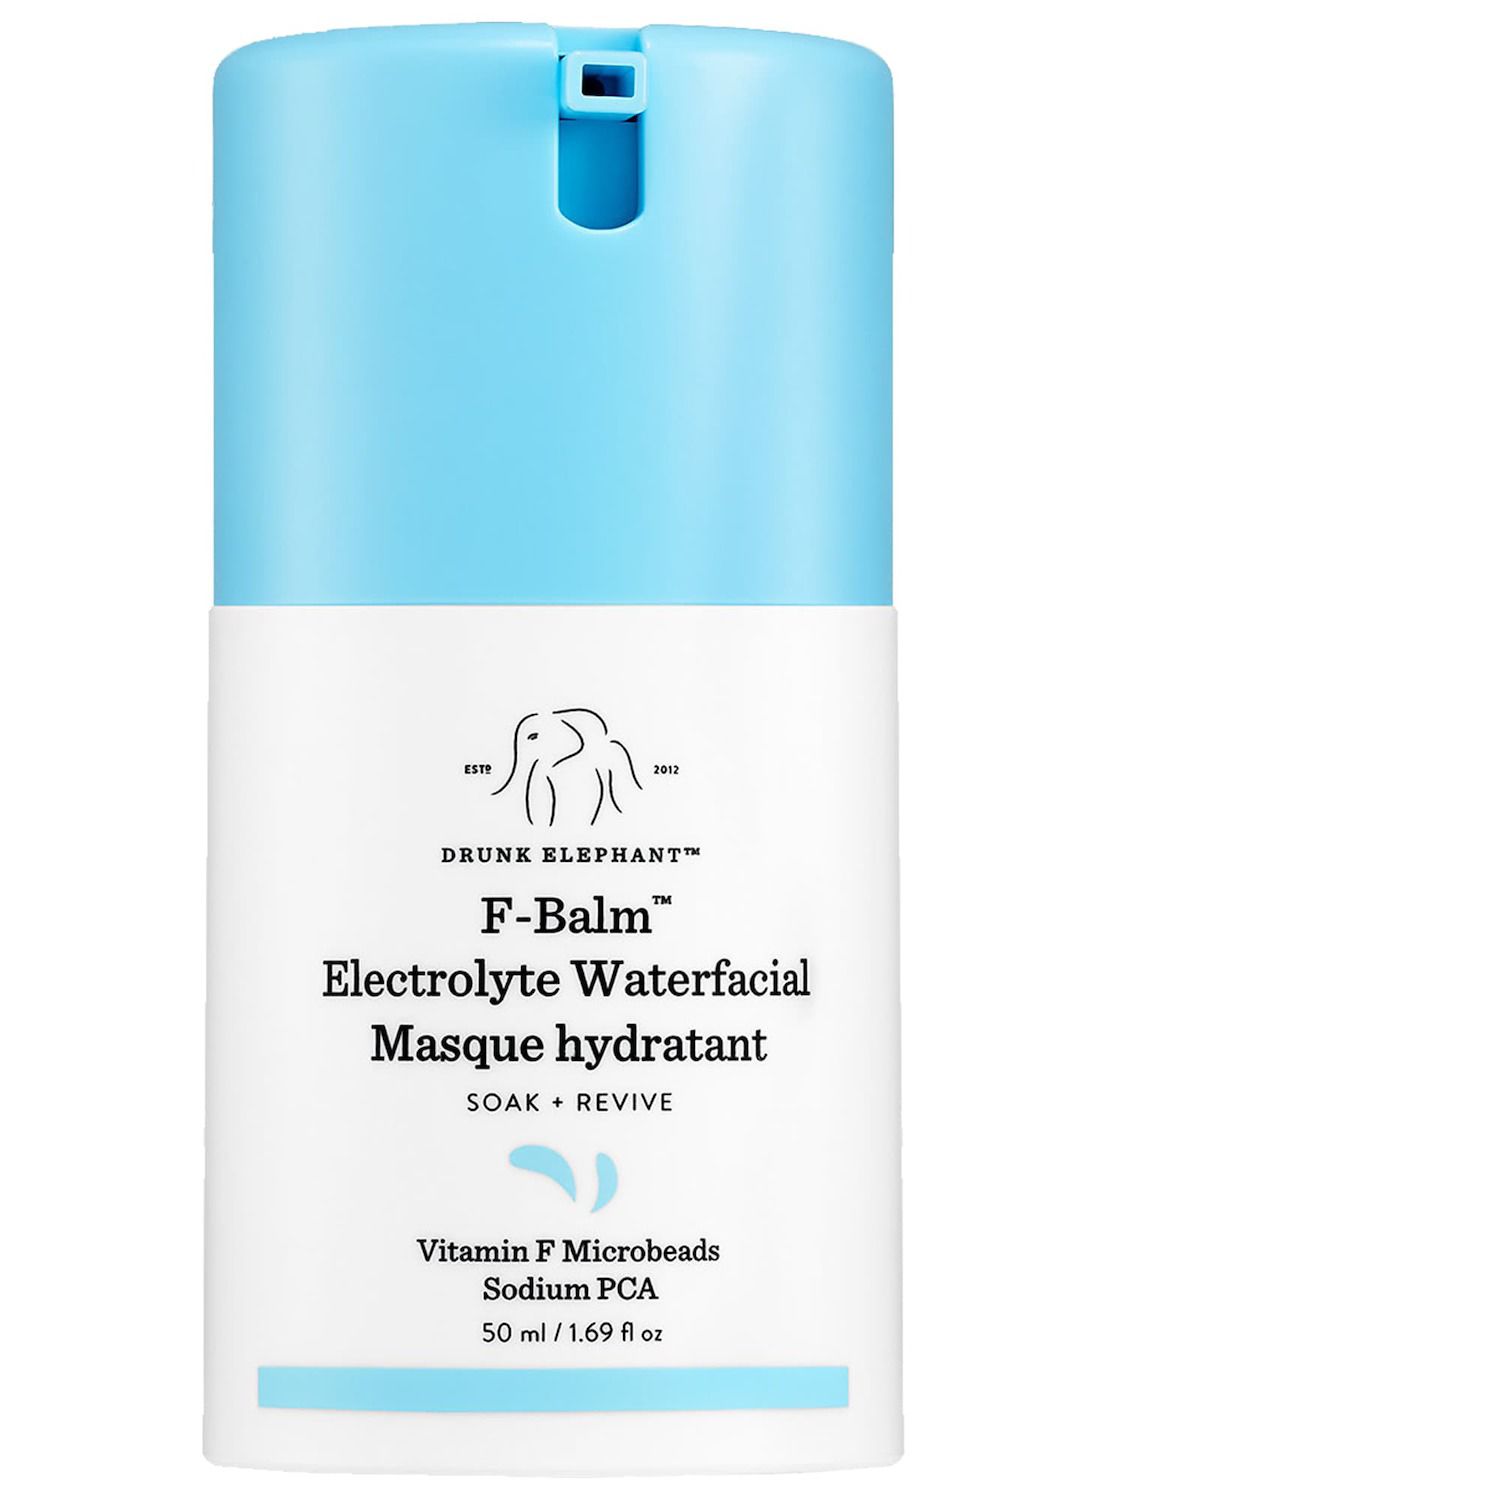 Image for Drunk Elephant F-Balm Electrolyte Waterfacial Mask at Kohl's.